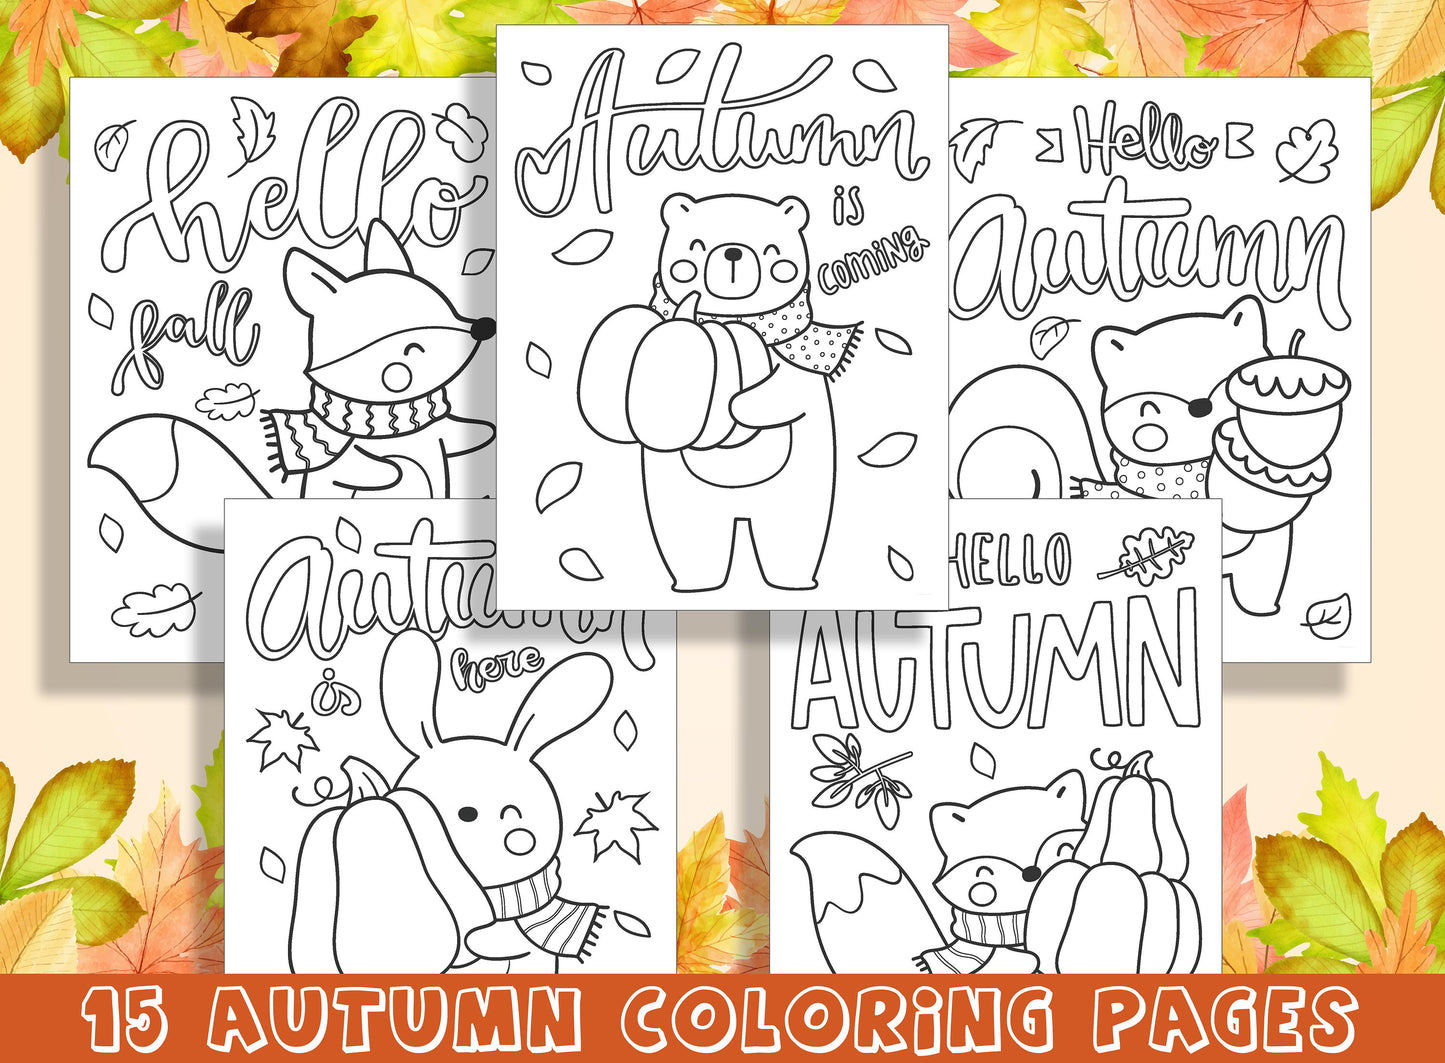 15 Beautiful Autumn Coloring Pages for Preschool and Kindergarten Kids, PDF File, Instant Download